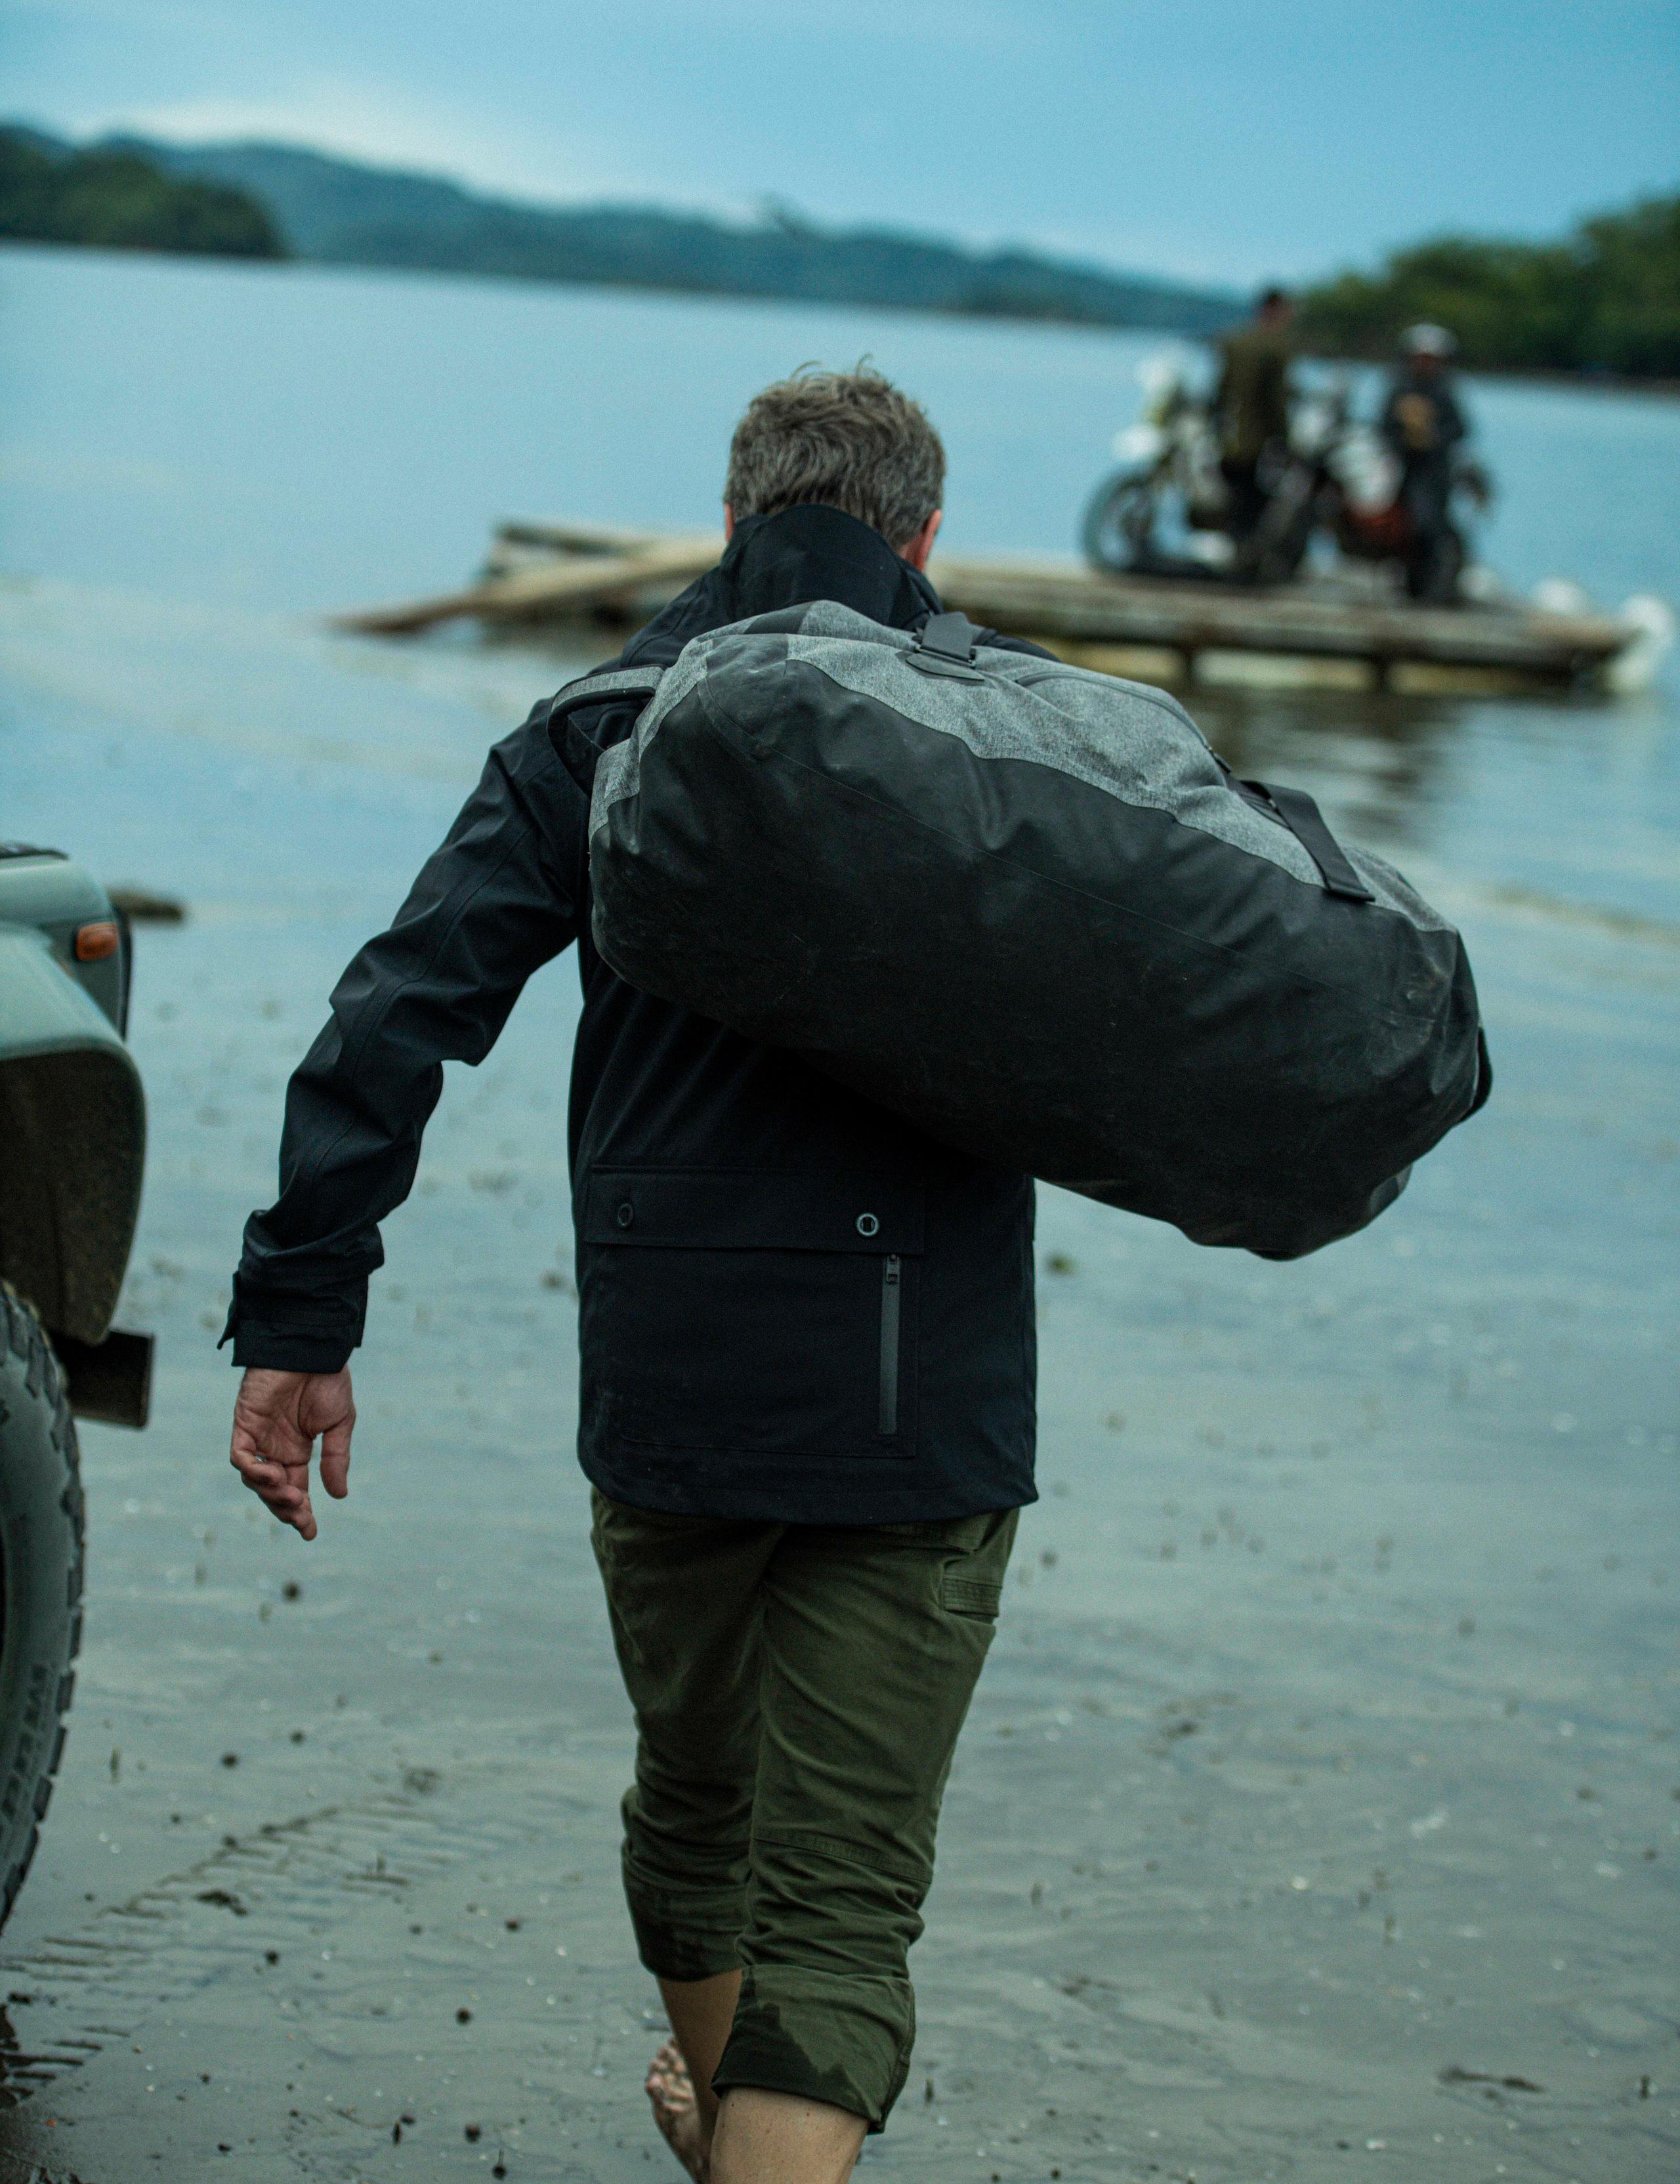 Man wearing Endeavor Jacket and holding a bag heading to transport raft on river in Costa Rica